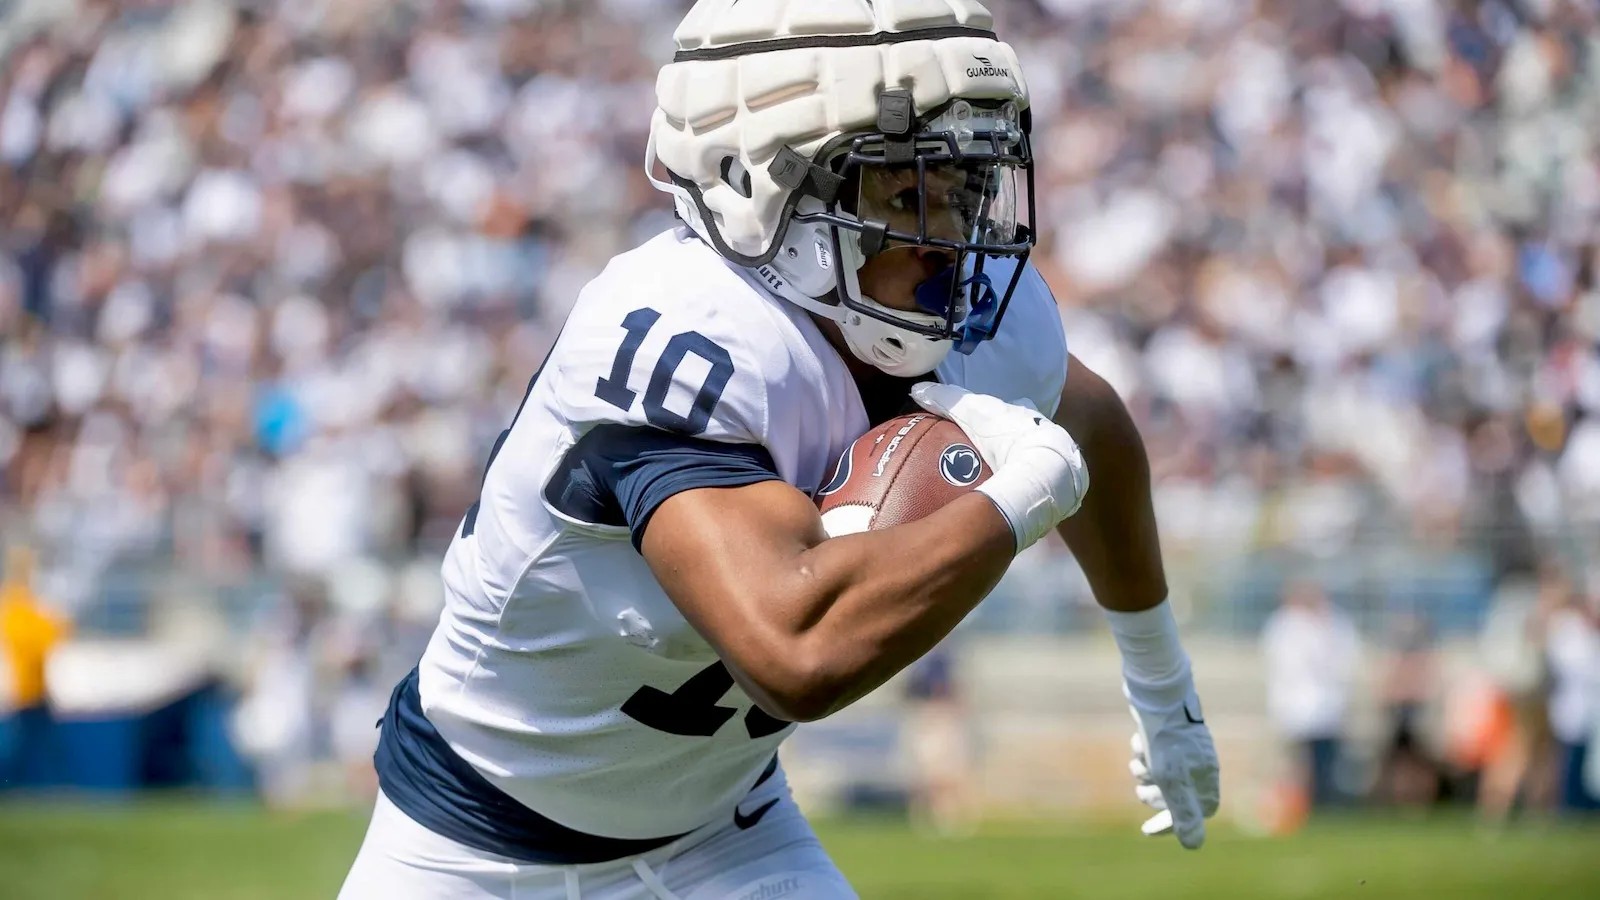 How are Penn State's freshman stars performing in camp?